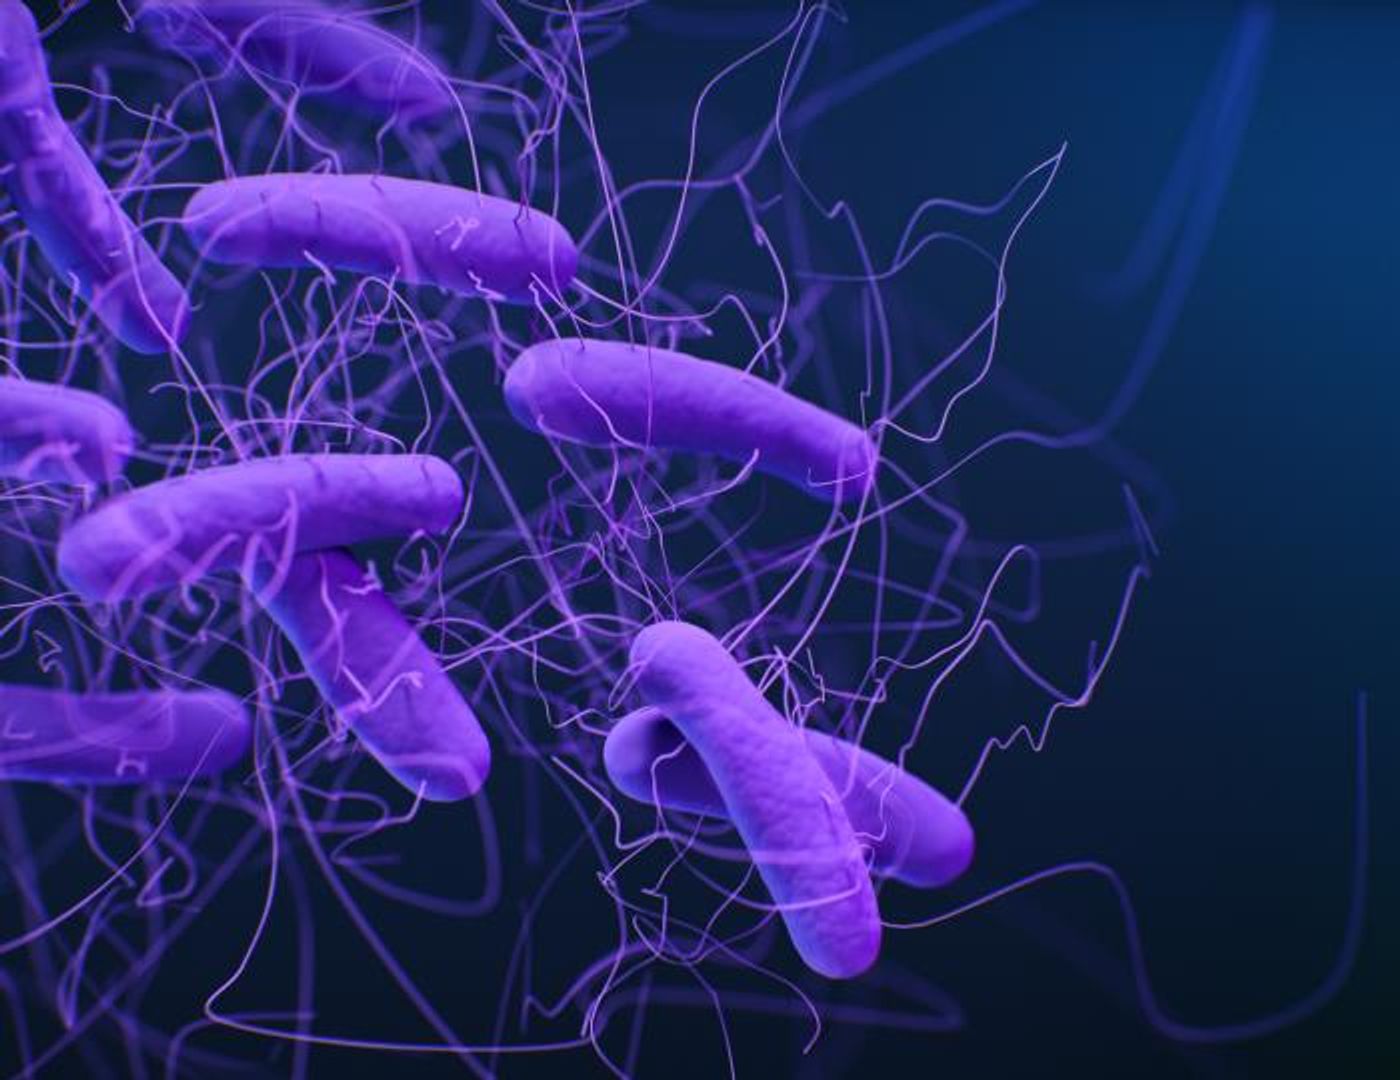 A medical illustration of Clostridioides difficile bacteria, formerly known as Clostridium difficile / Credit: CDC/Antibiotic Resistance Coordination and Strategy Unit / Photo Credit: Medical Illustrator: Jennifer Oosthuizen